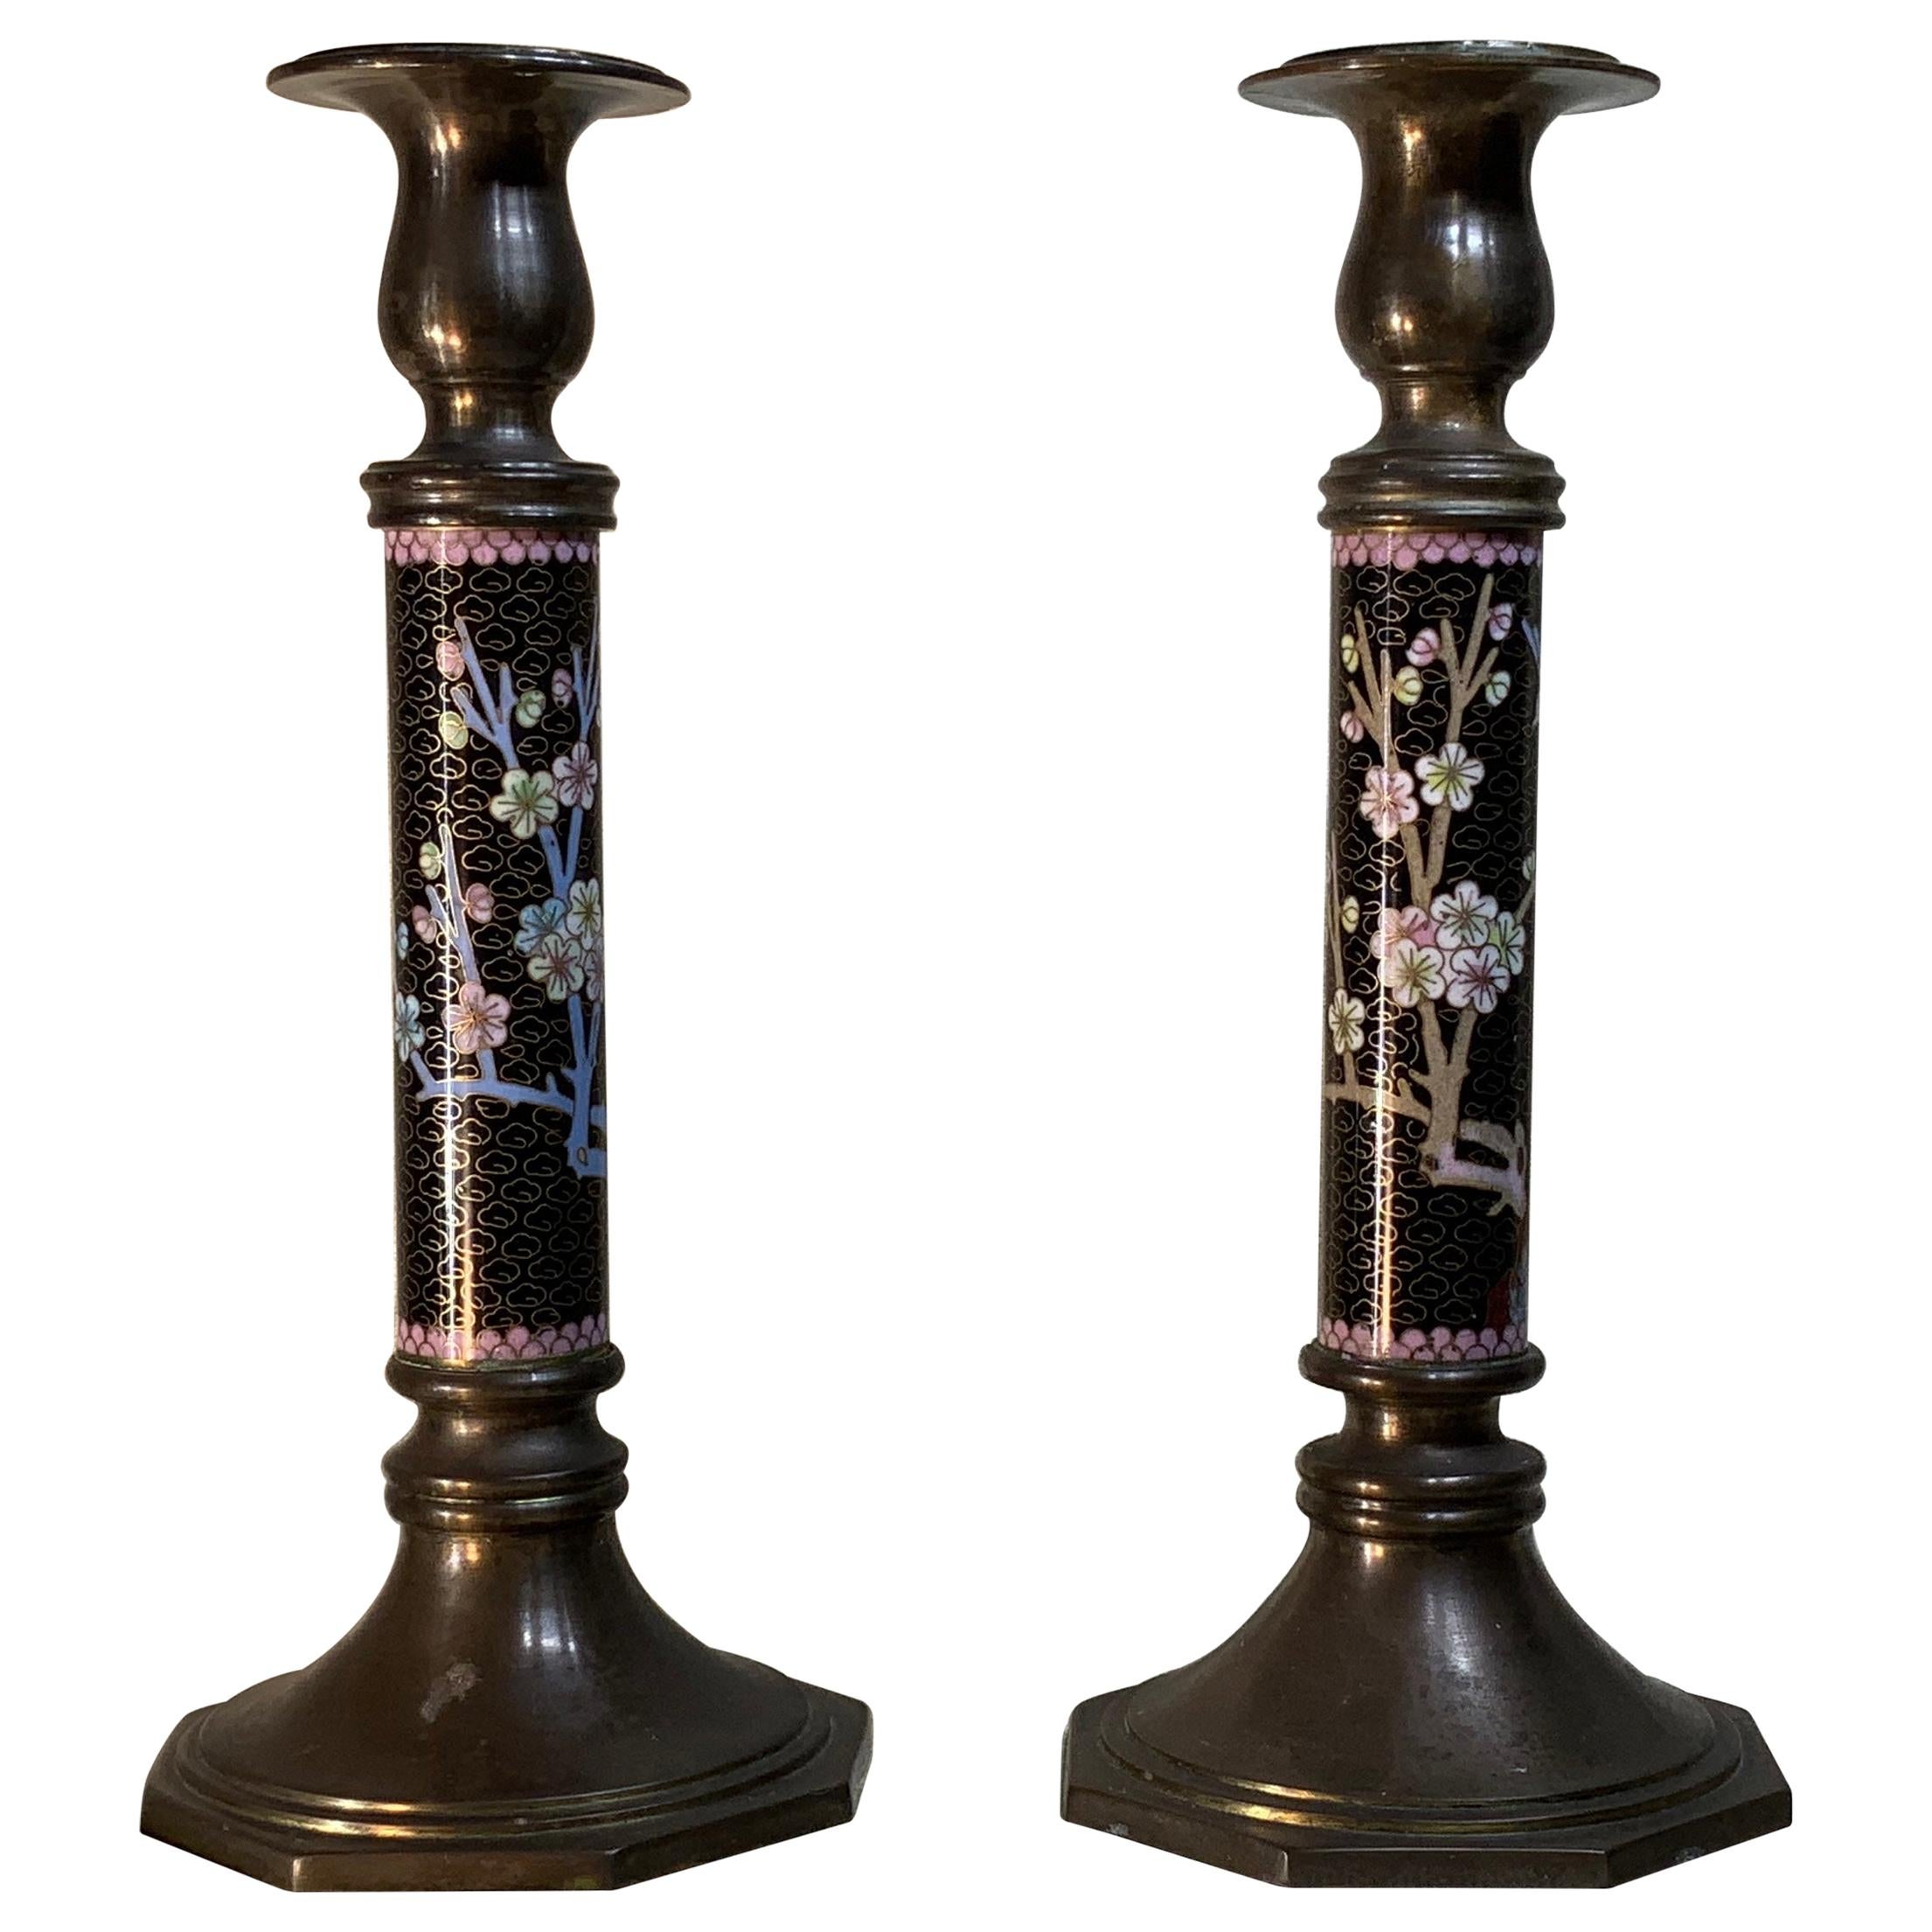 Pair of Chinese Cloisonné Candleholders